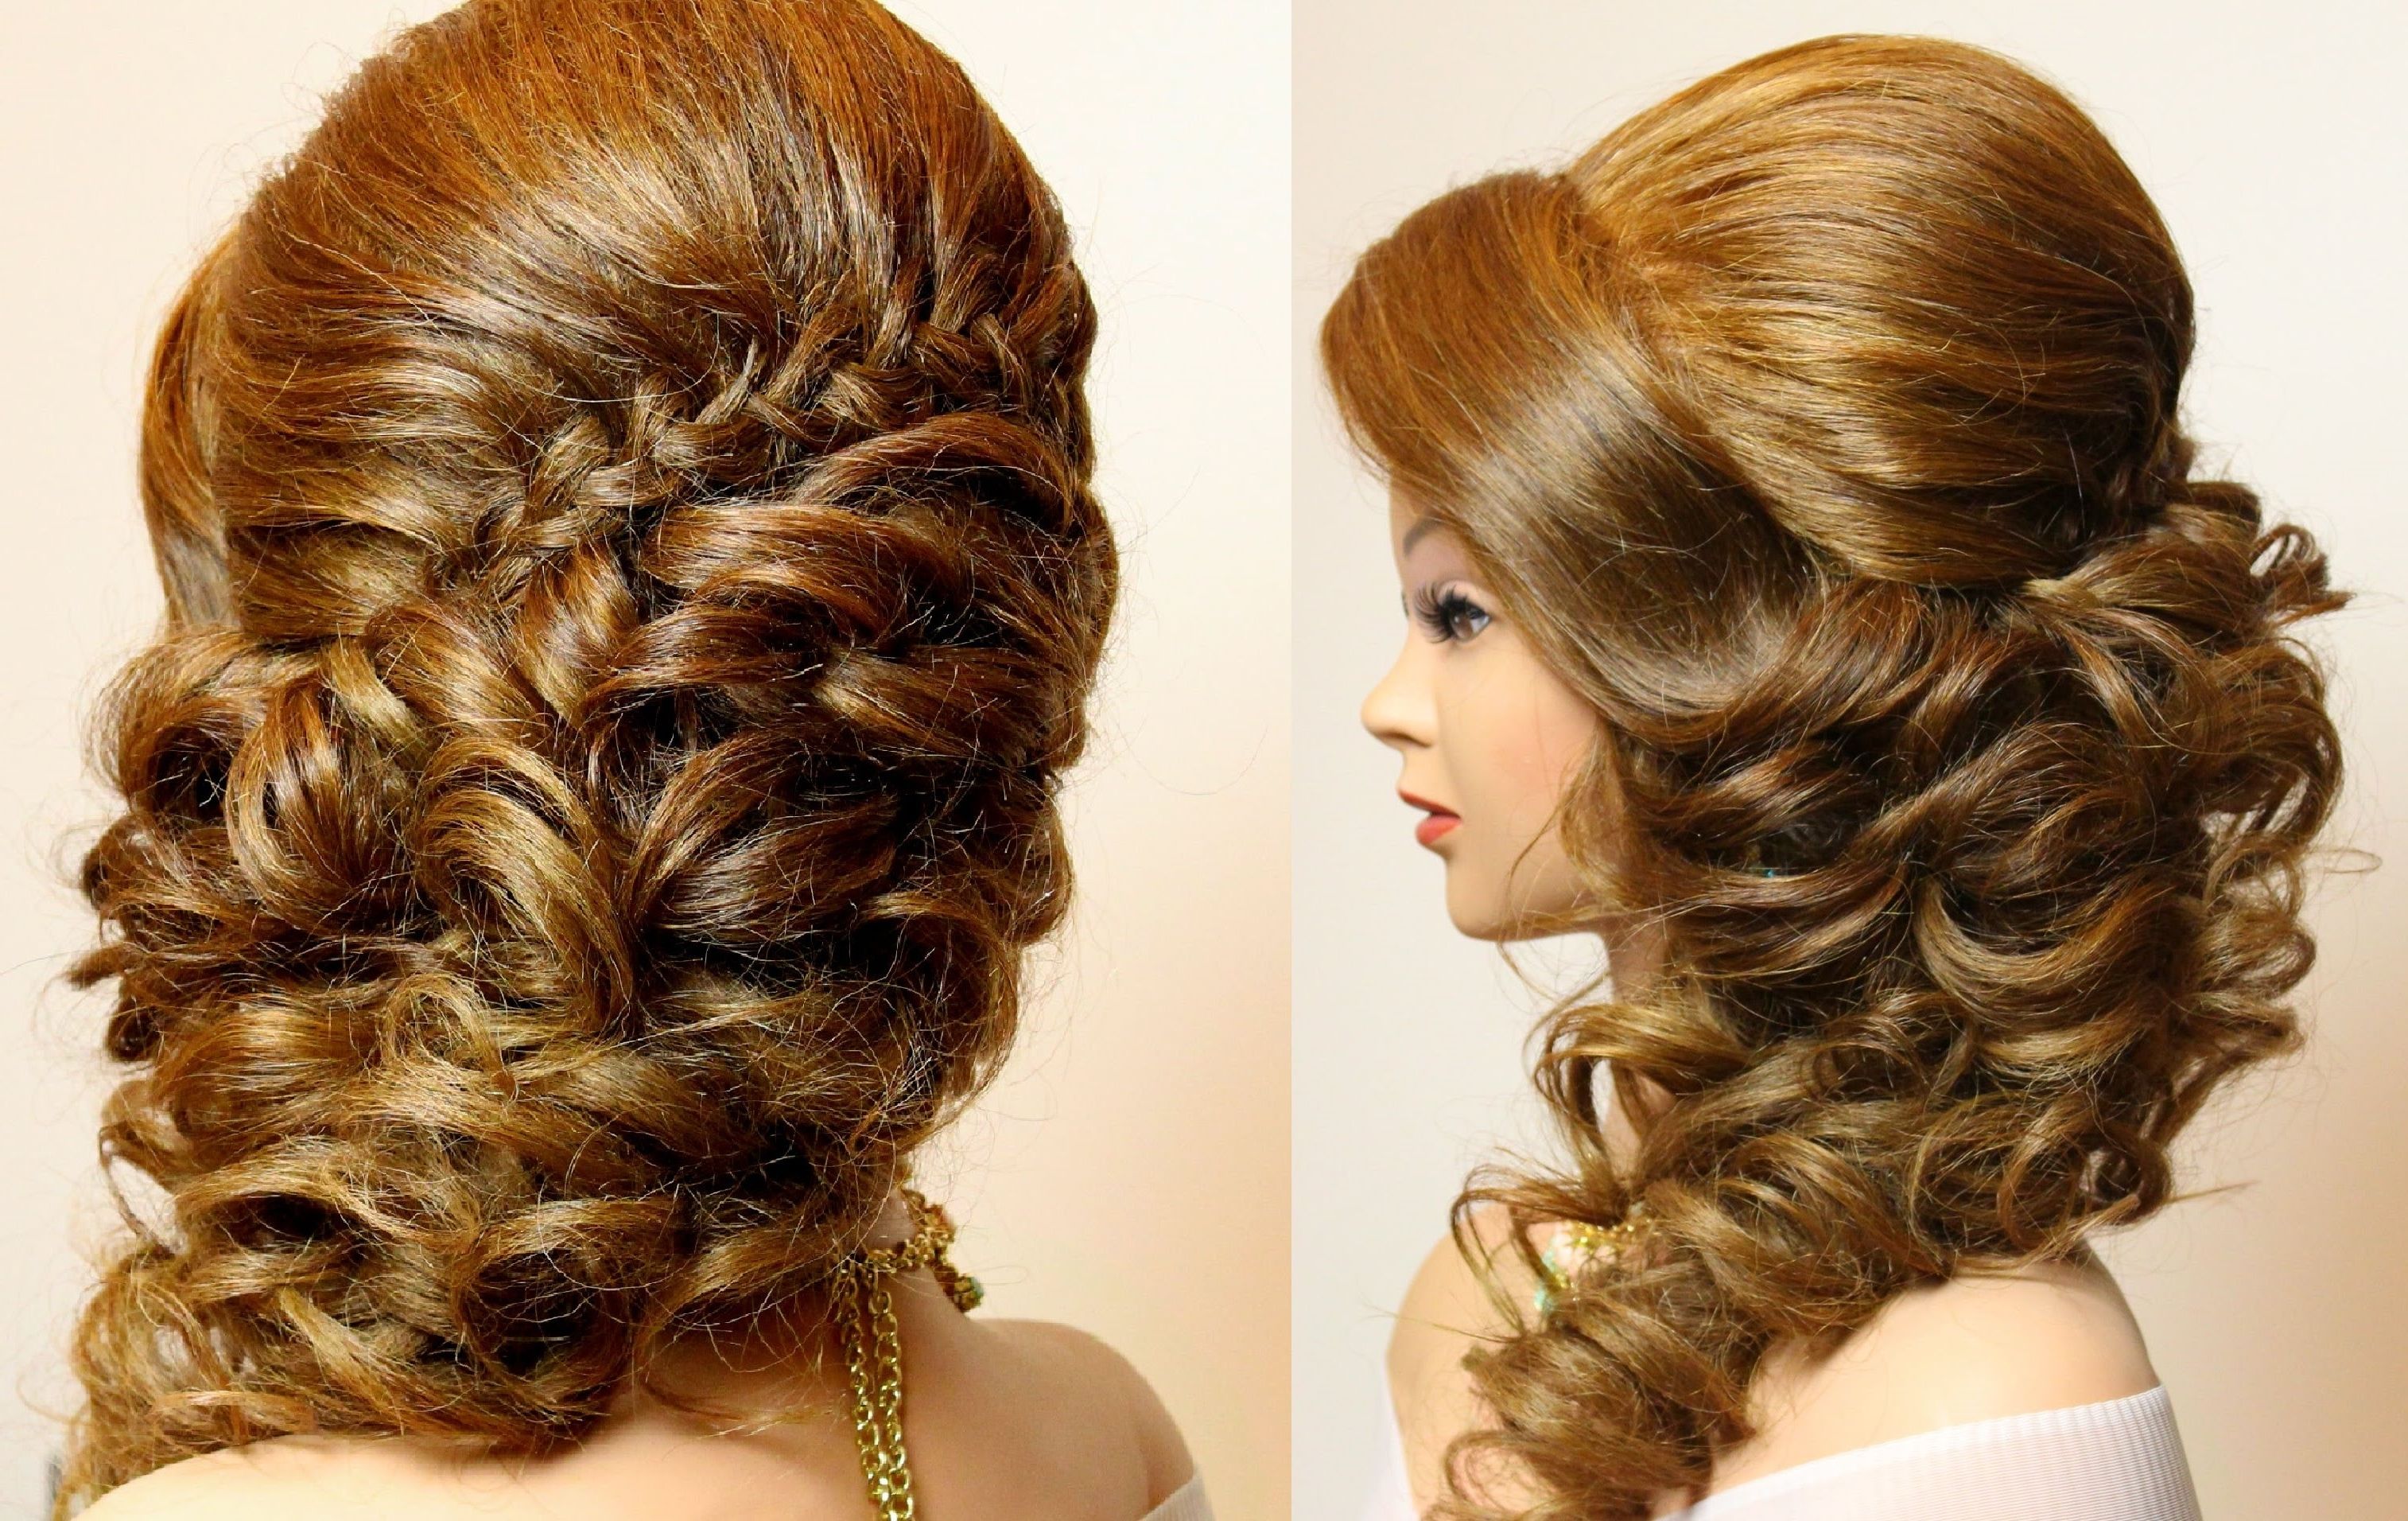 Bridal Hairstyle With Braid And Curls (View 1 of 15)